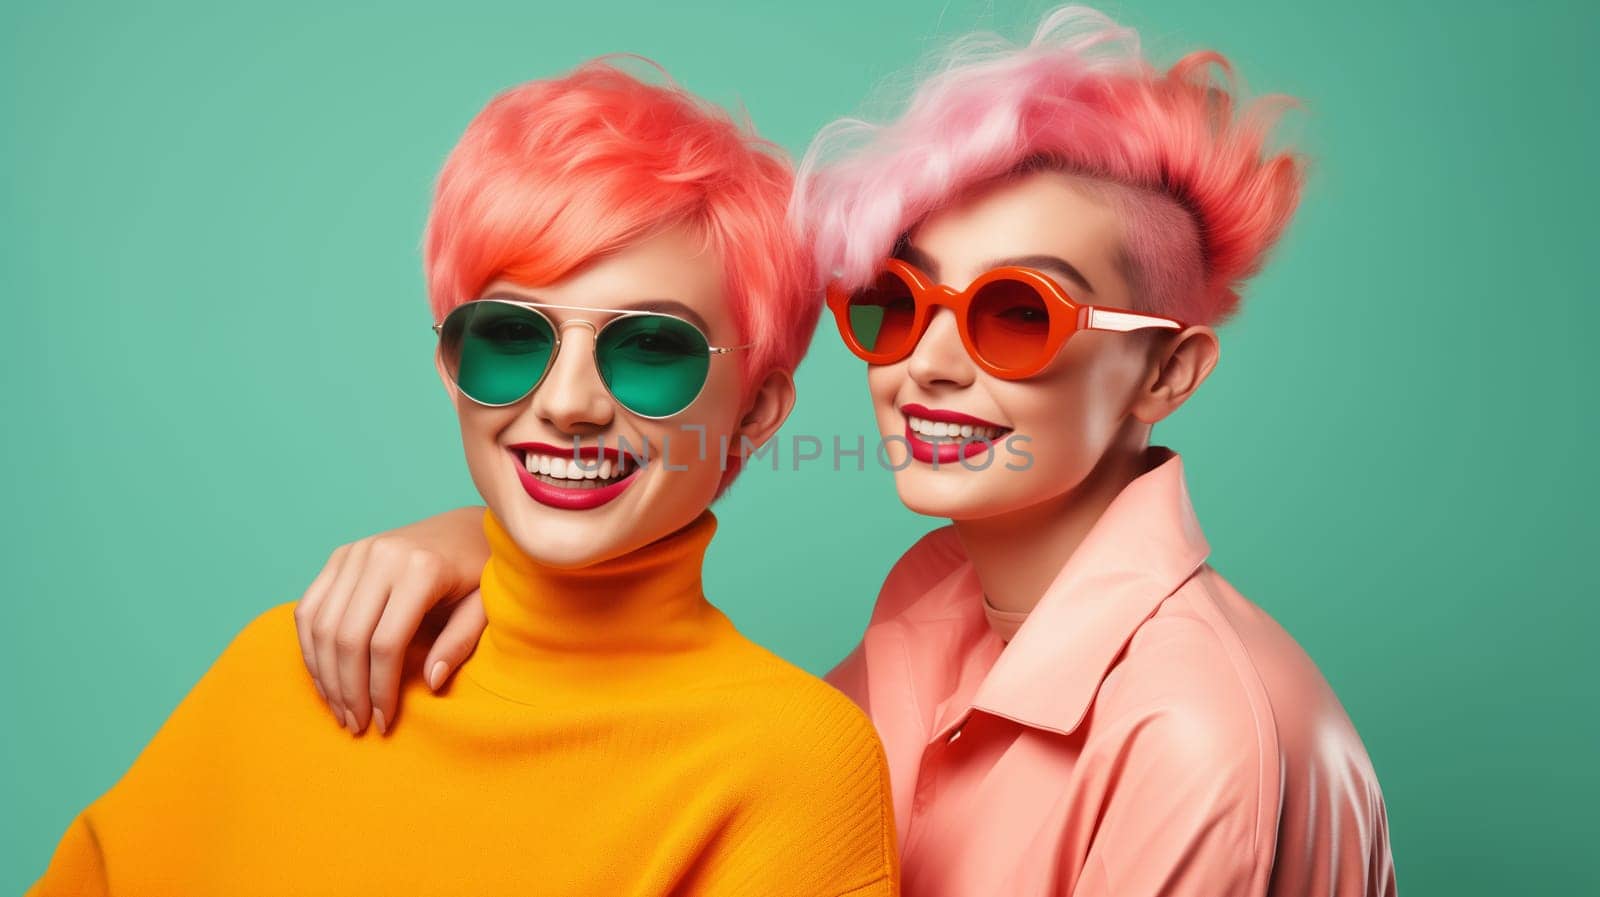 Colorful portrait of stylish beautiful happy two women with bright hairstyles, dyed colored hair by Rohappy